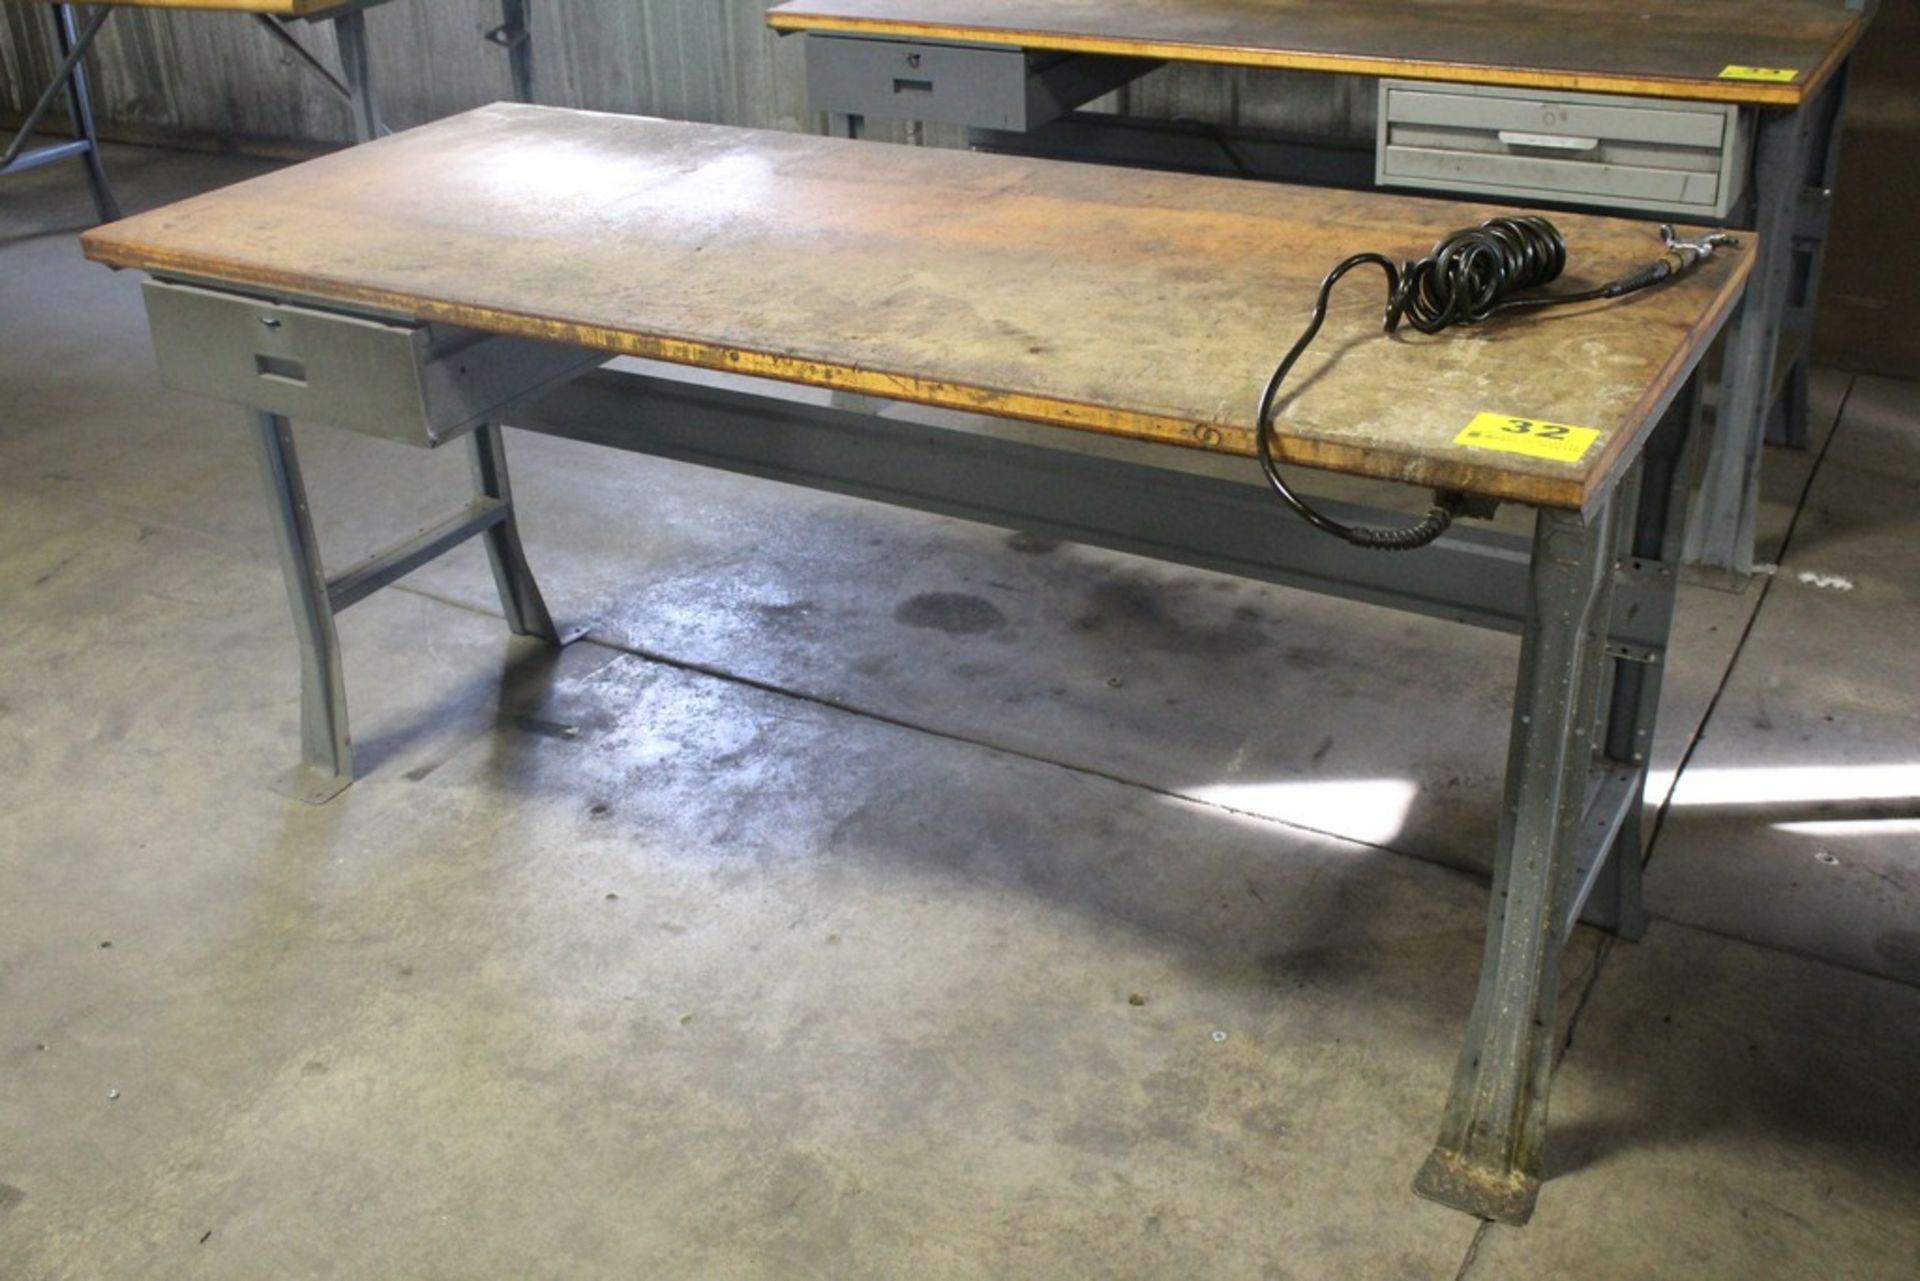 STEEL SHOP TABLE WITH WOOD TOP AND DRAWER, 33" X 72" X 30", PNEUMATIC AIR LINE